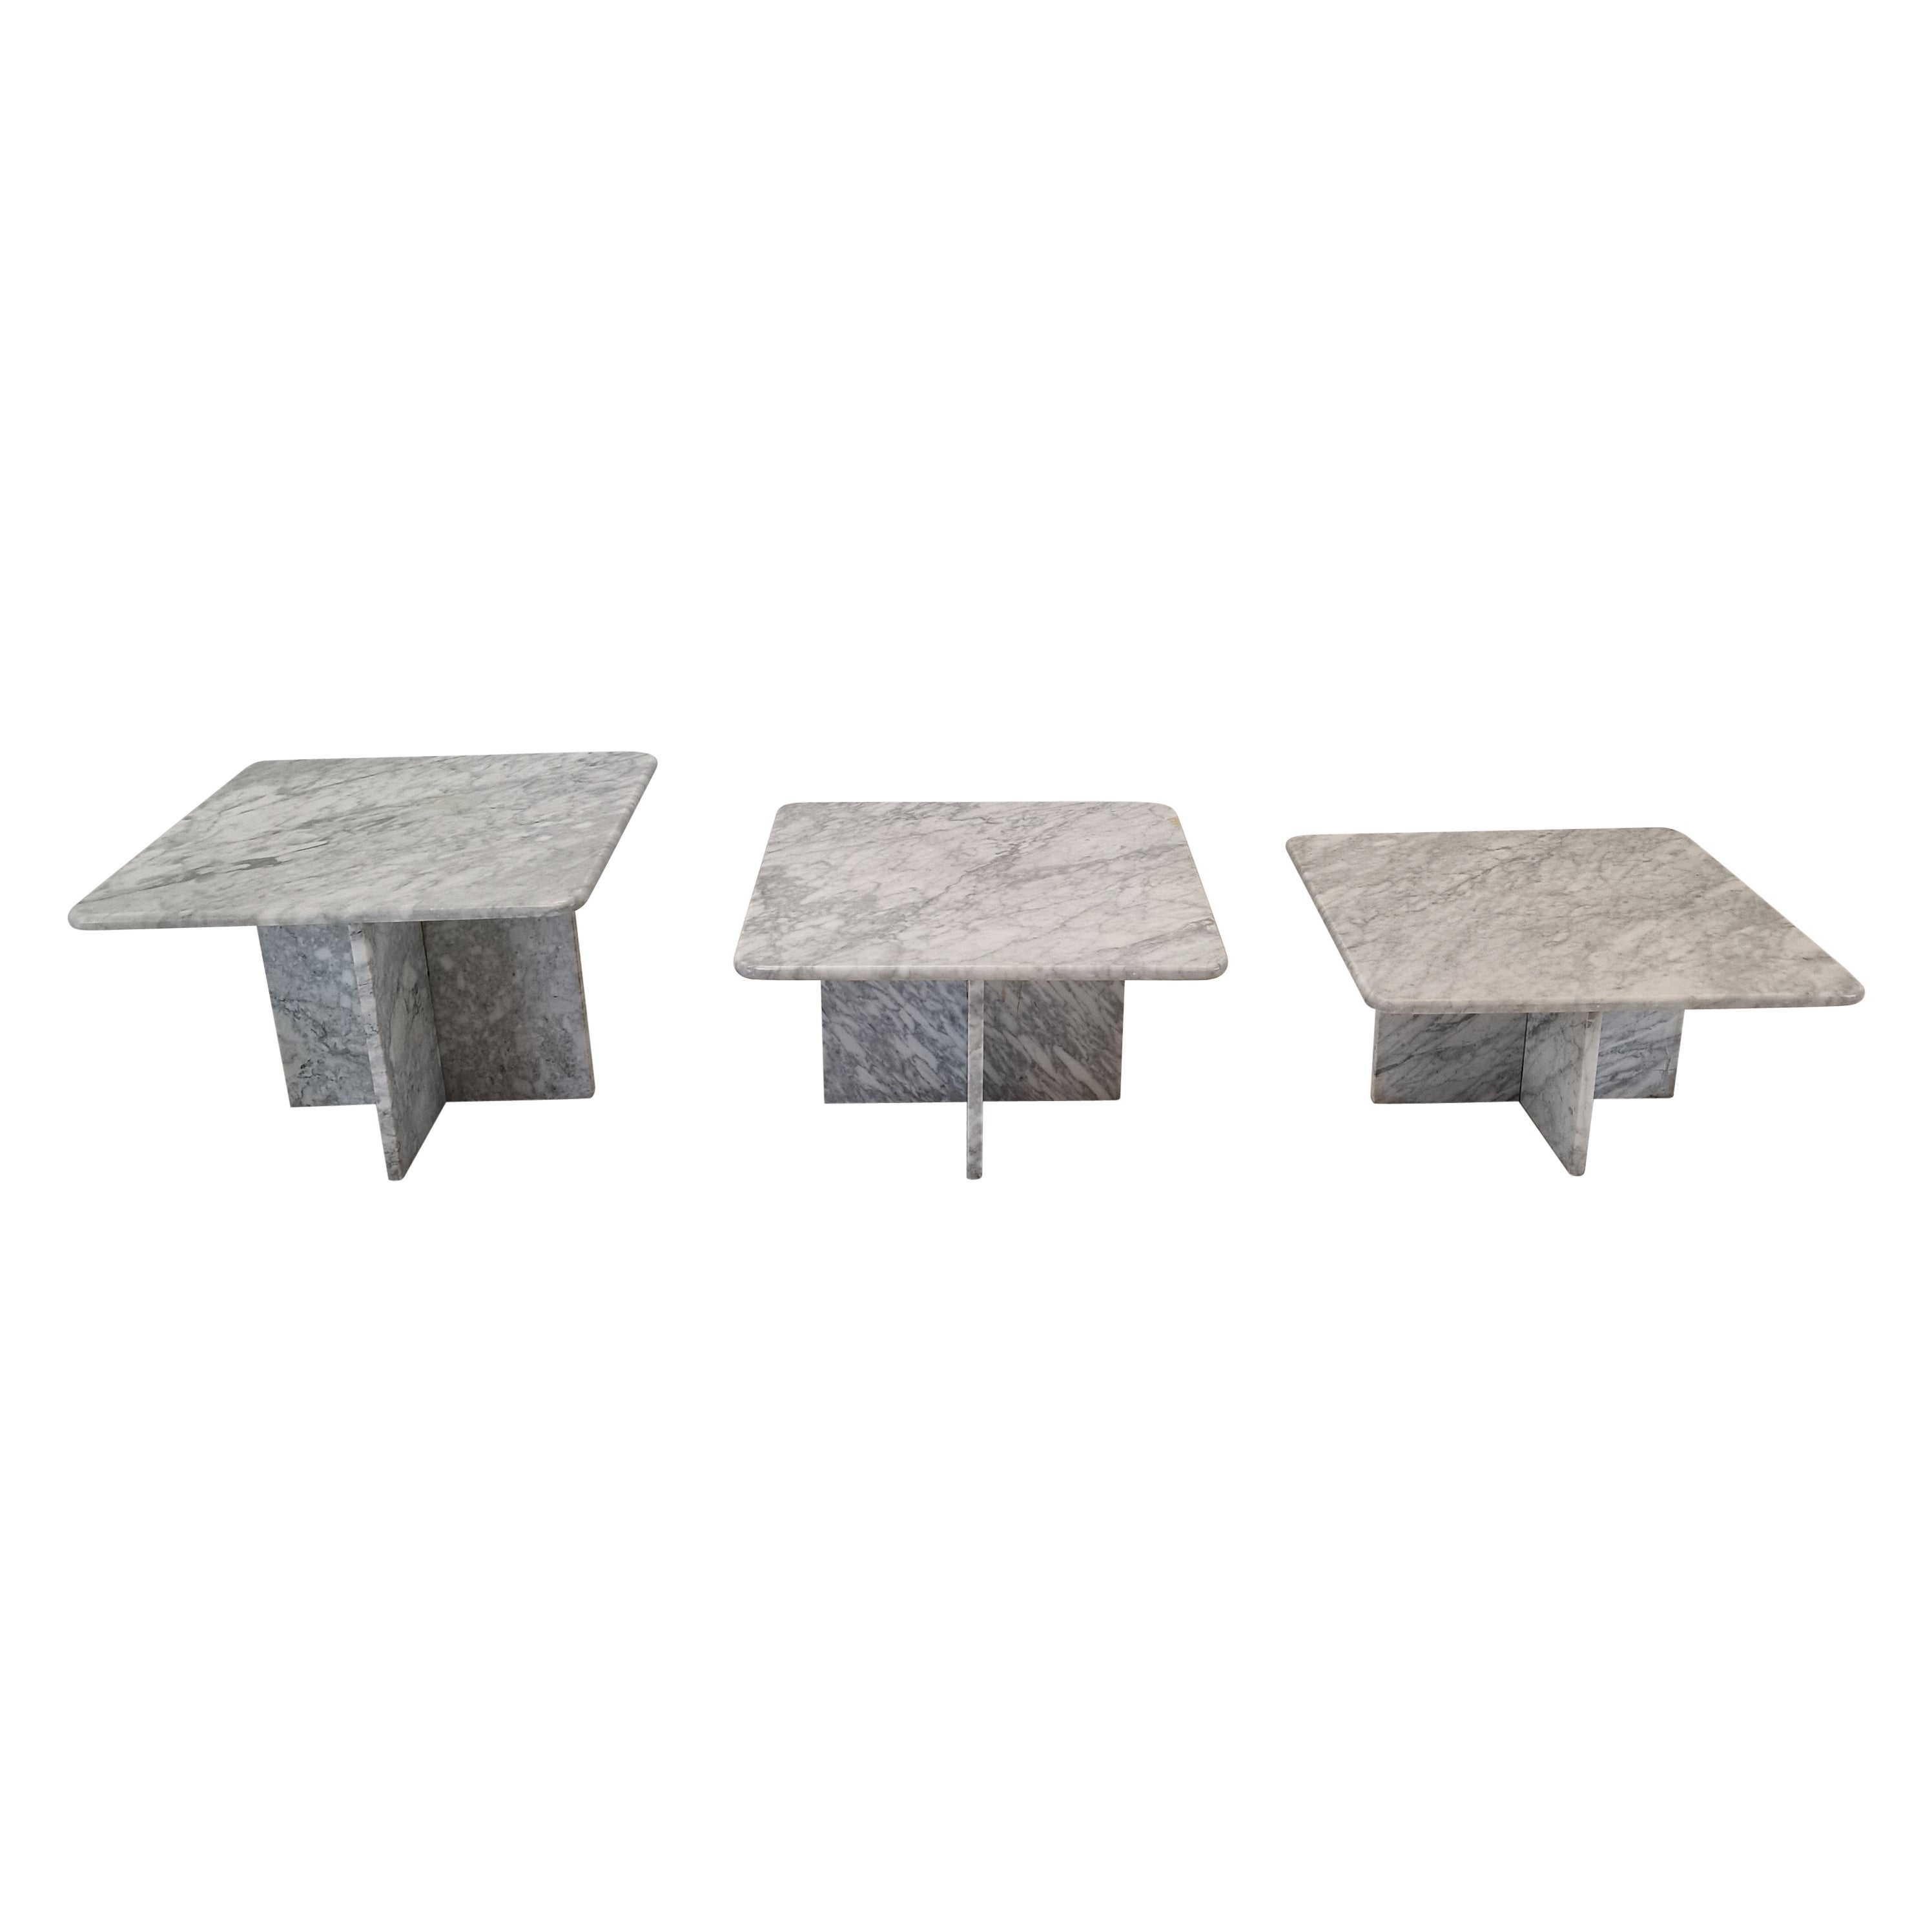 Set of 3 Italian Marble Coffee or Side Tables, 1970s